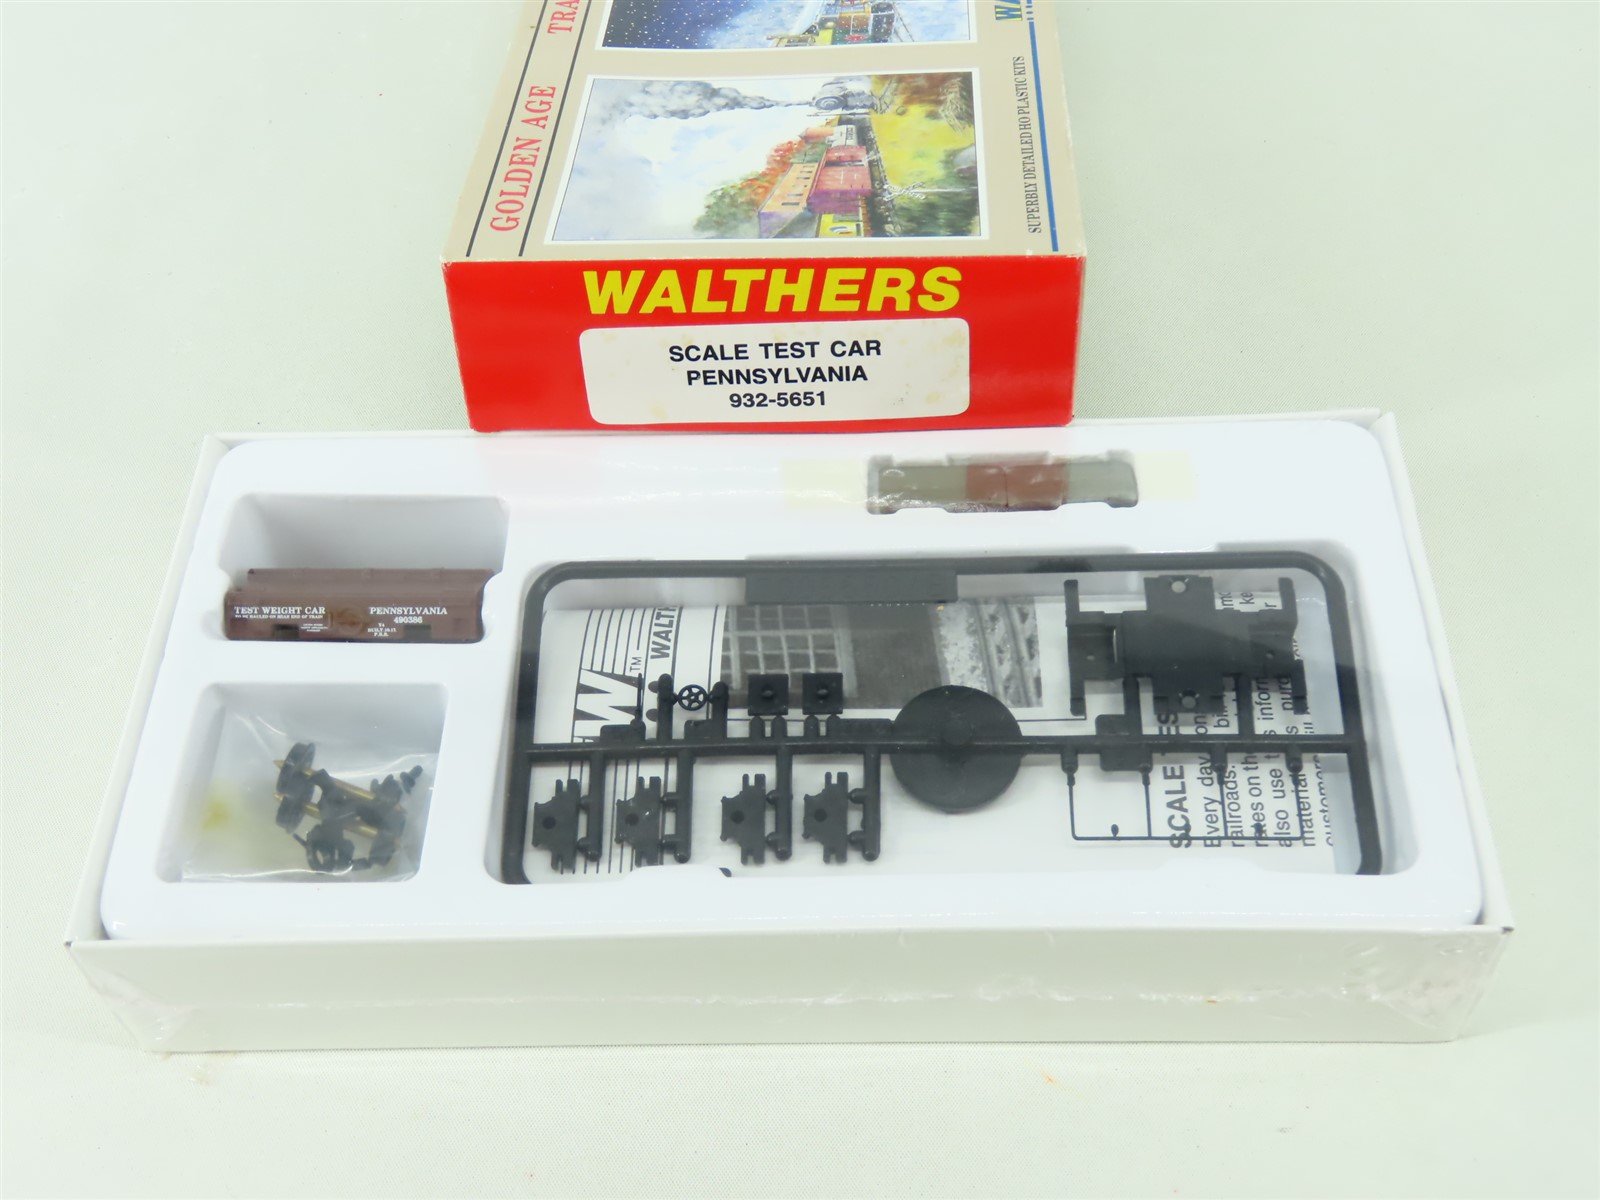 HO Scale Walthers Kit #932-5651 PRR Pennsylvania Scale Test Car #490386 - SEALED